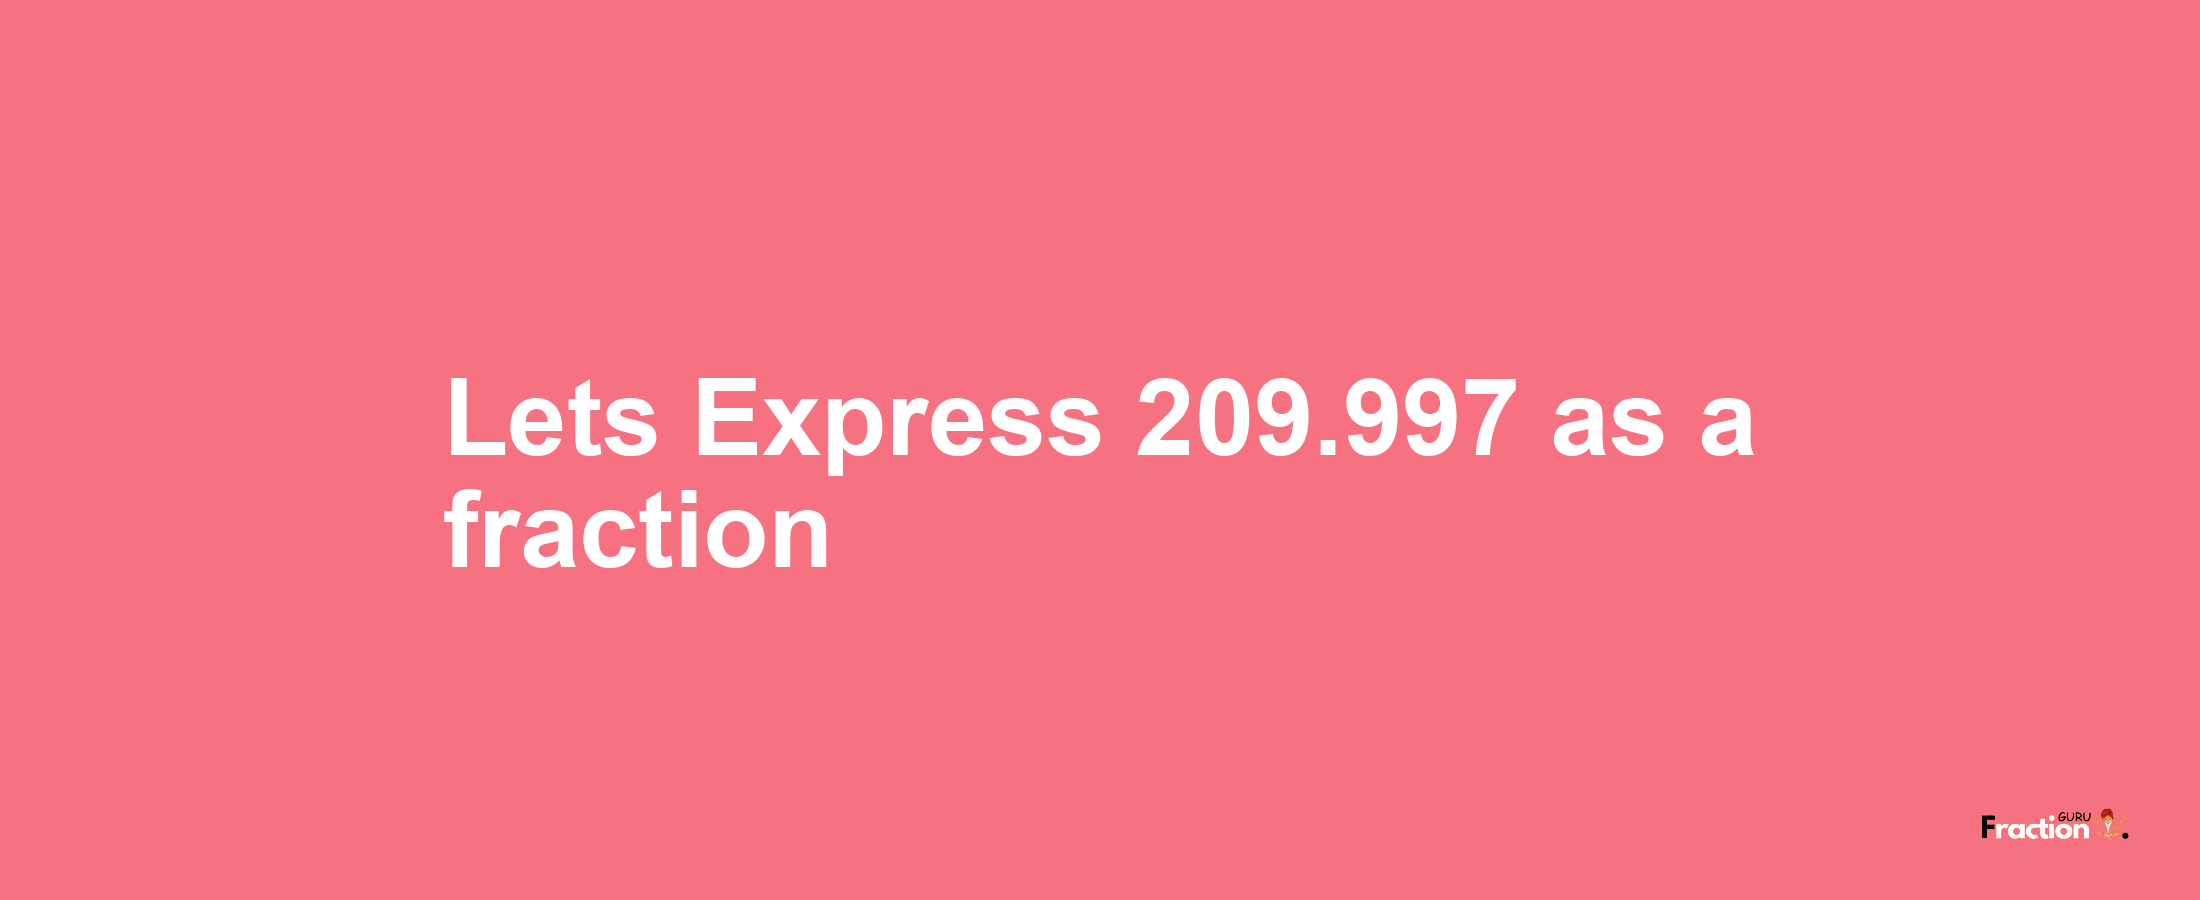 Lets Express 209.997 as afraction